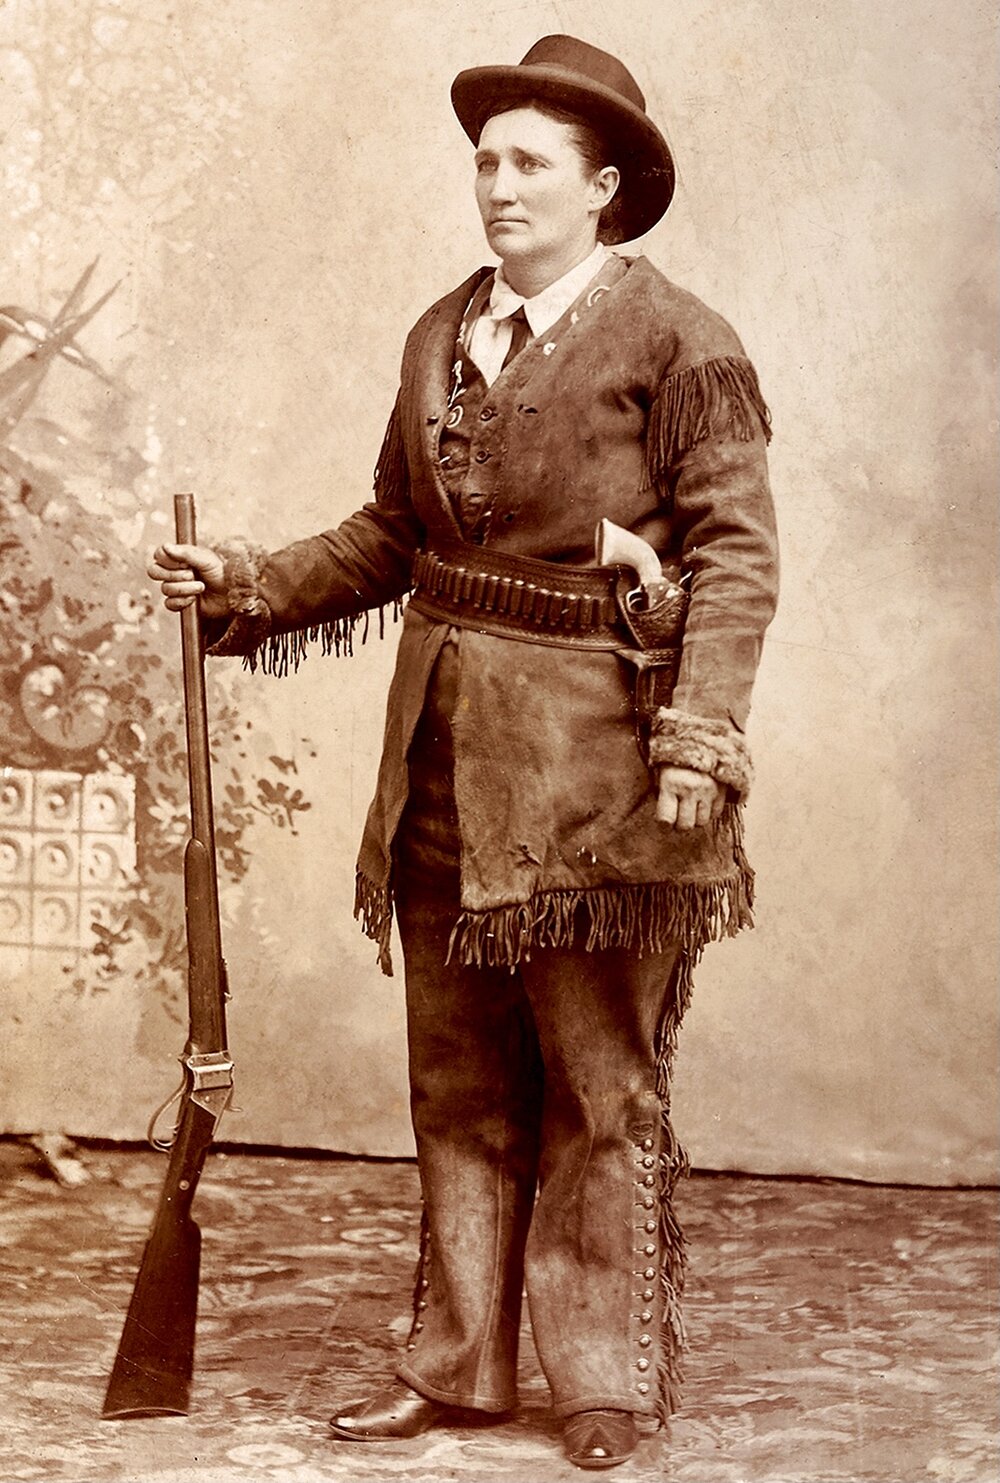 Calamity Jane in buckskins with ivory-gripped Colt revolver and Sharps rifle